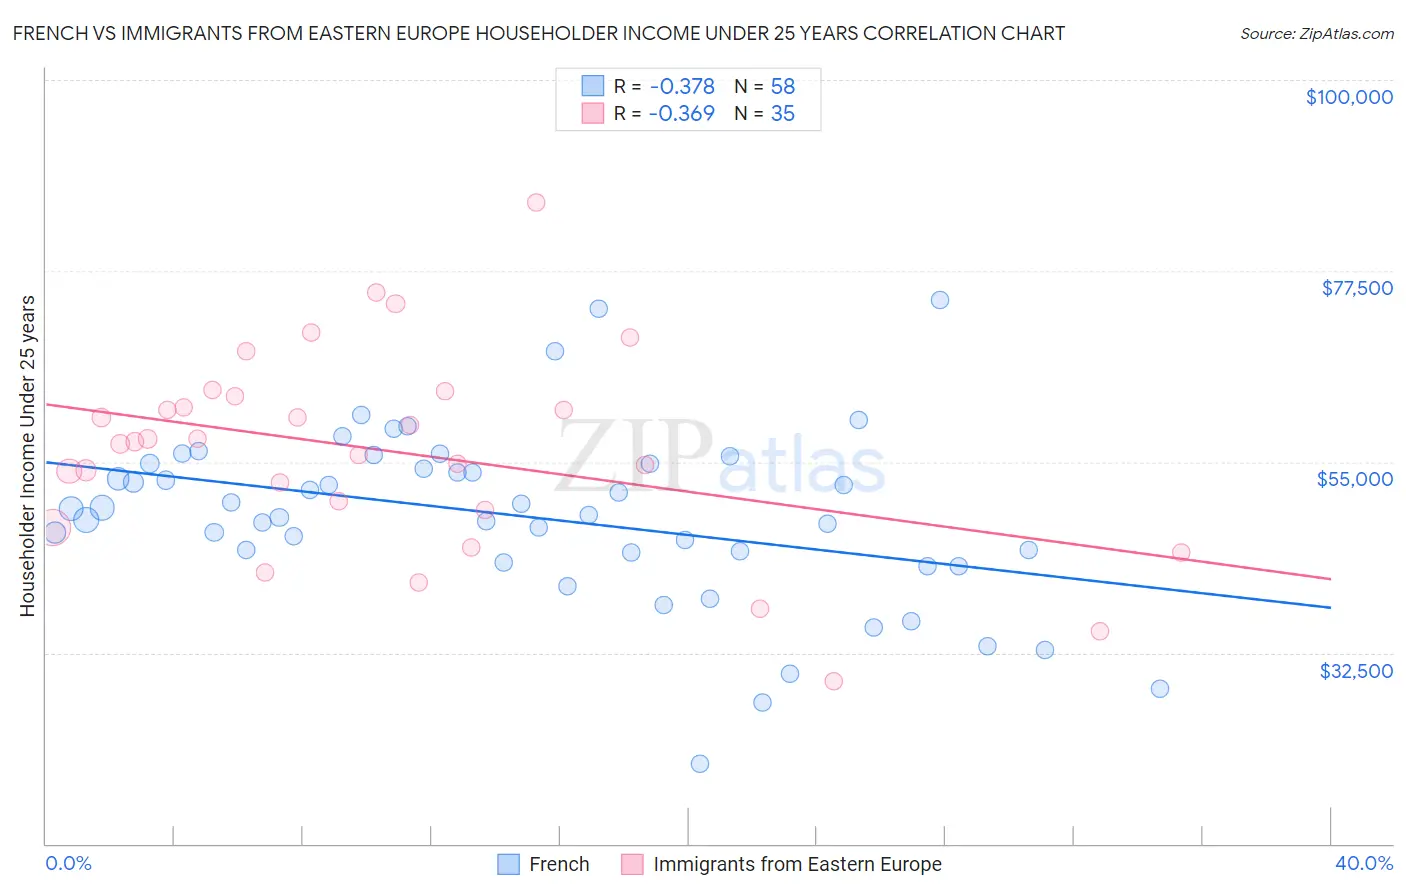 French vs Immigrants from Eastern Europe Householder Income Under 25 years